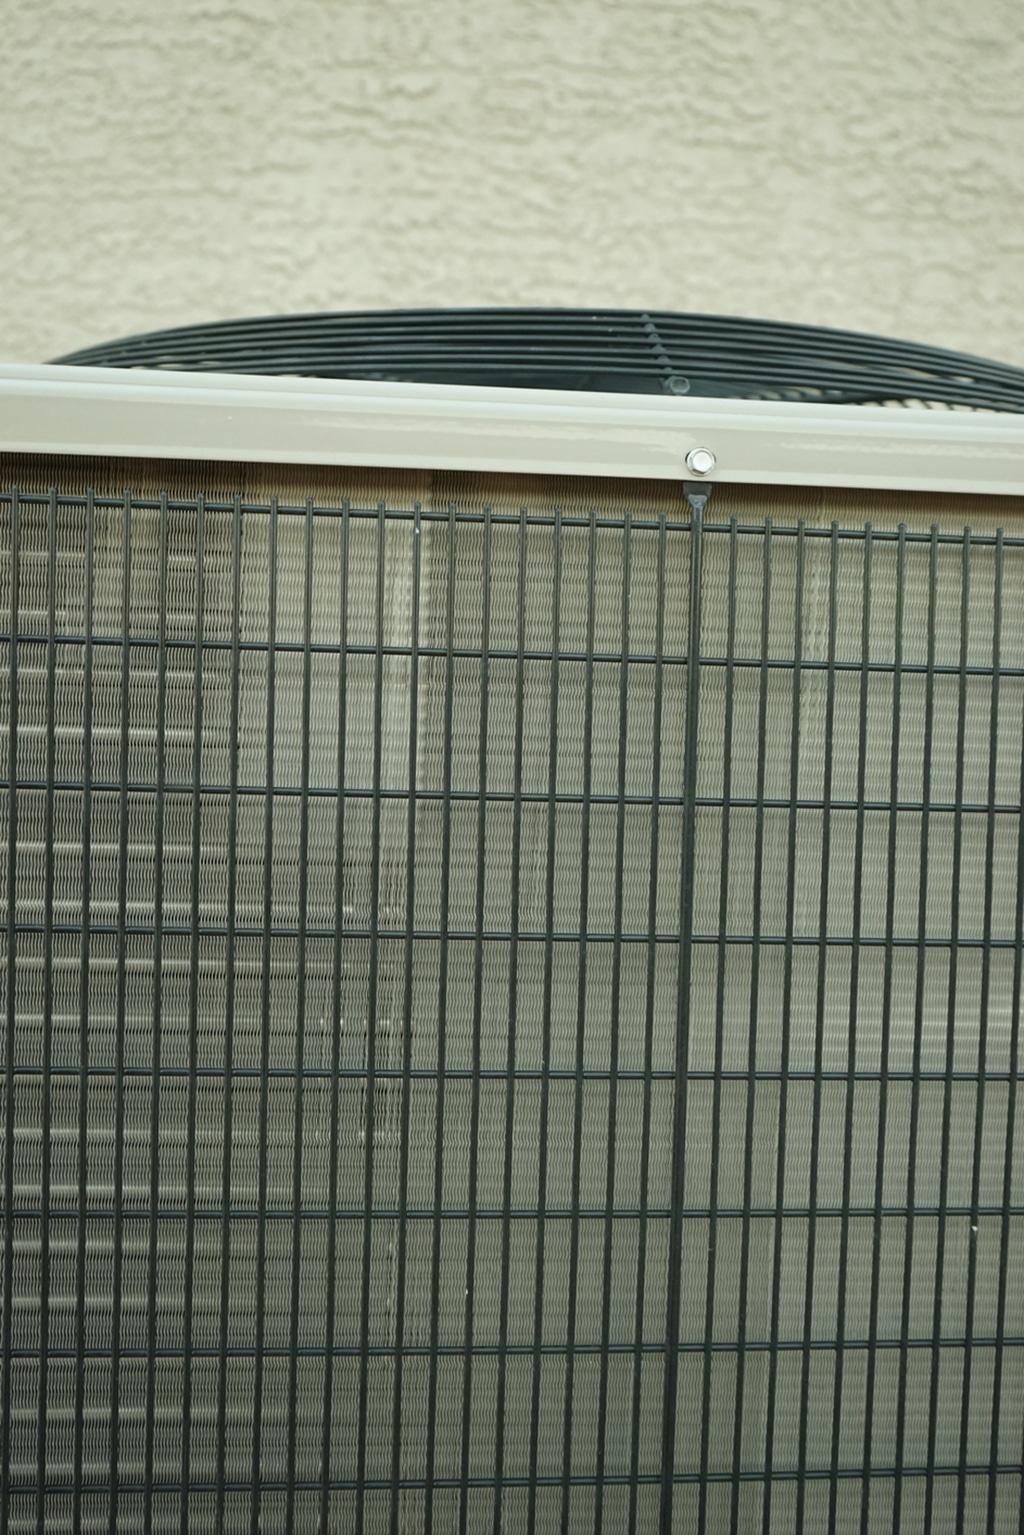 Learn All About AC Condenser Coil Cleaning With Your Reliable Air Conditioning Repair Technician | Frisco, TX